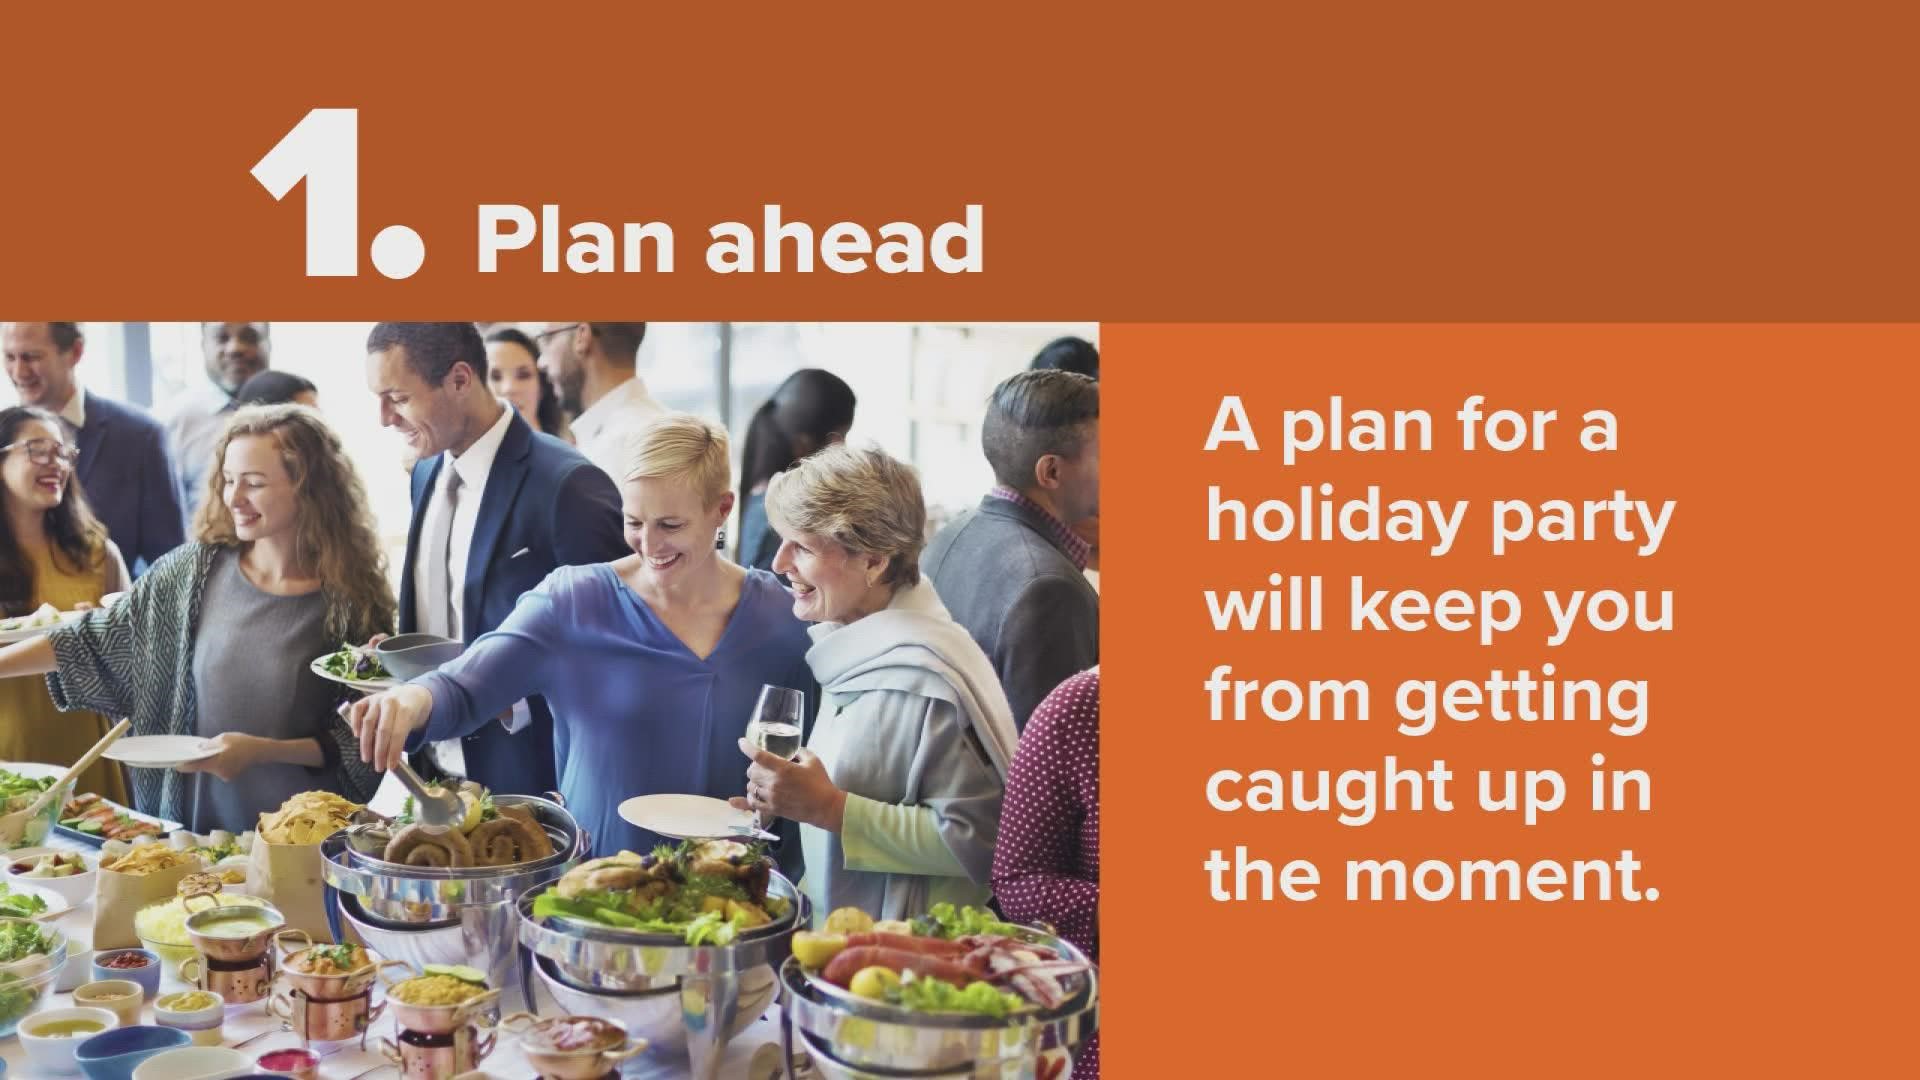 With traveling and visiting family for the holidays, your healthy eating could get thrown off balance. Here are some tips to help stay on track